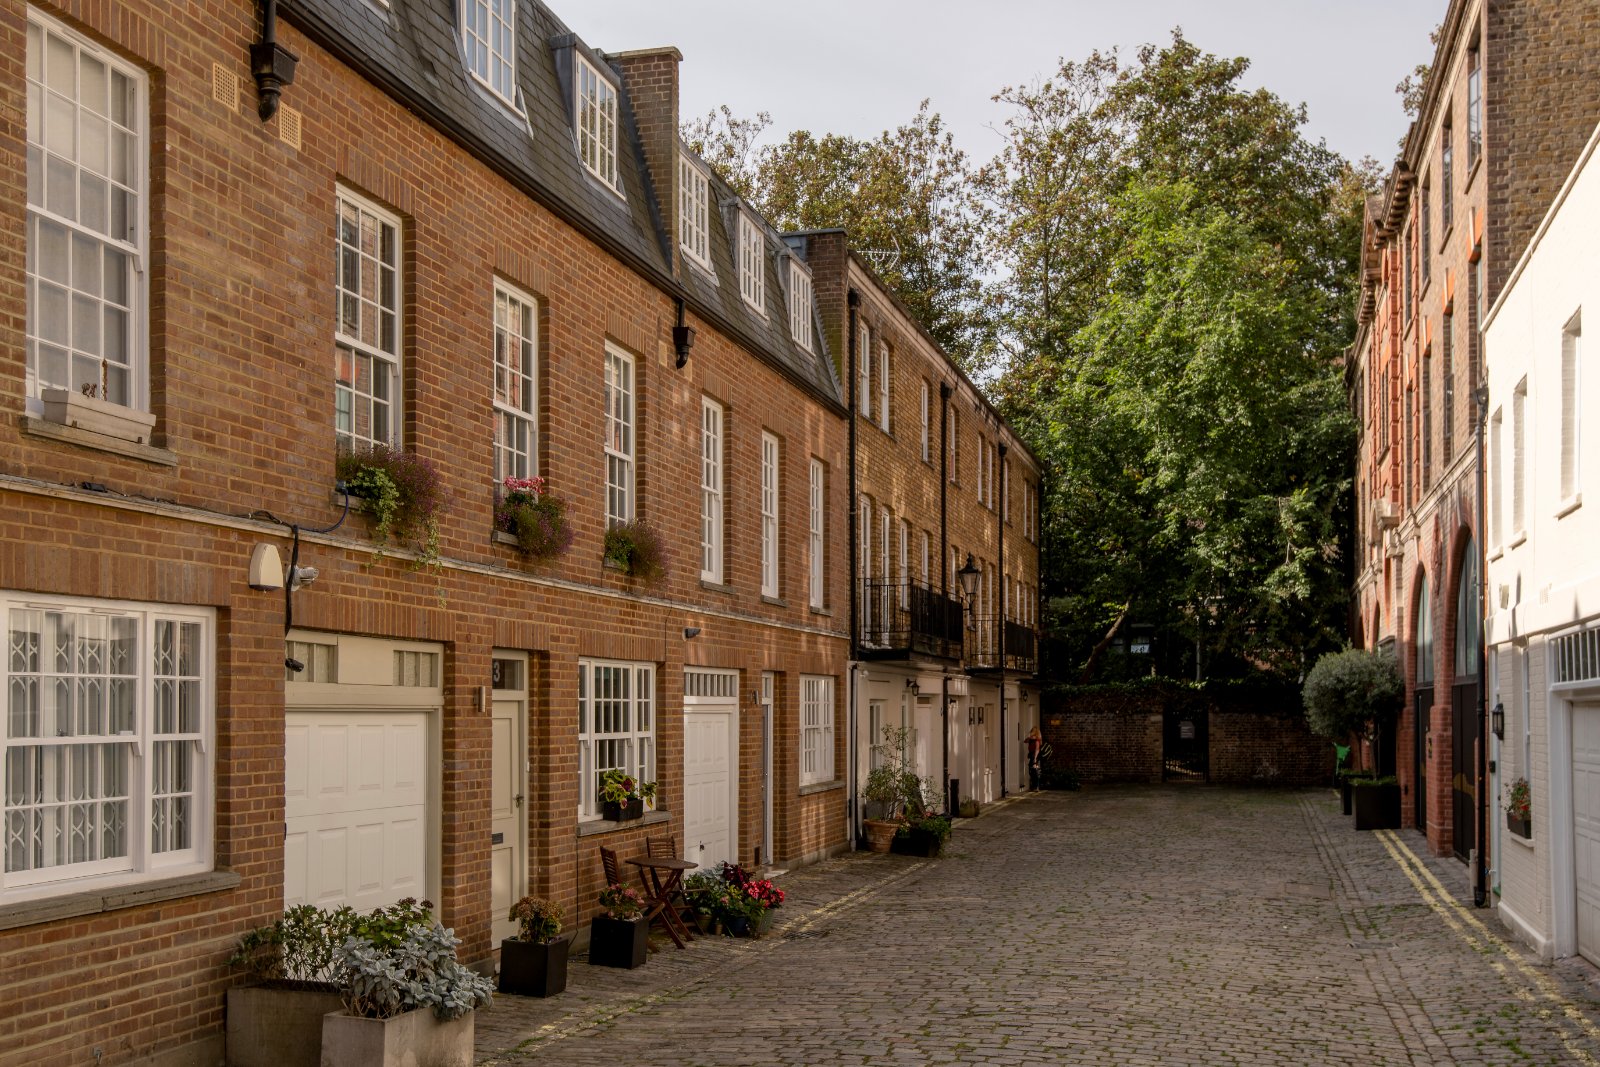 Beautiful mews house in a London street